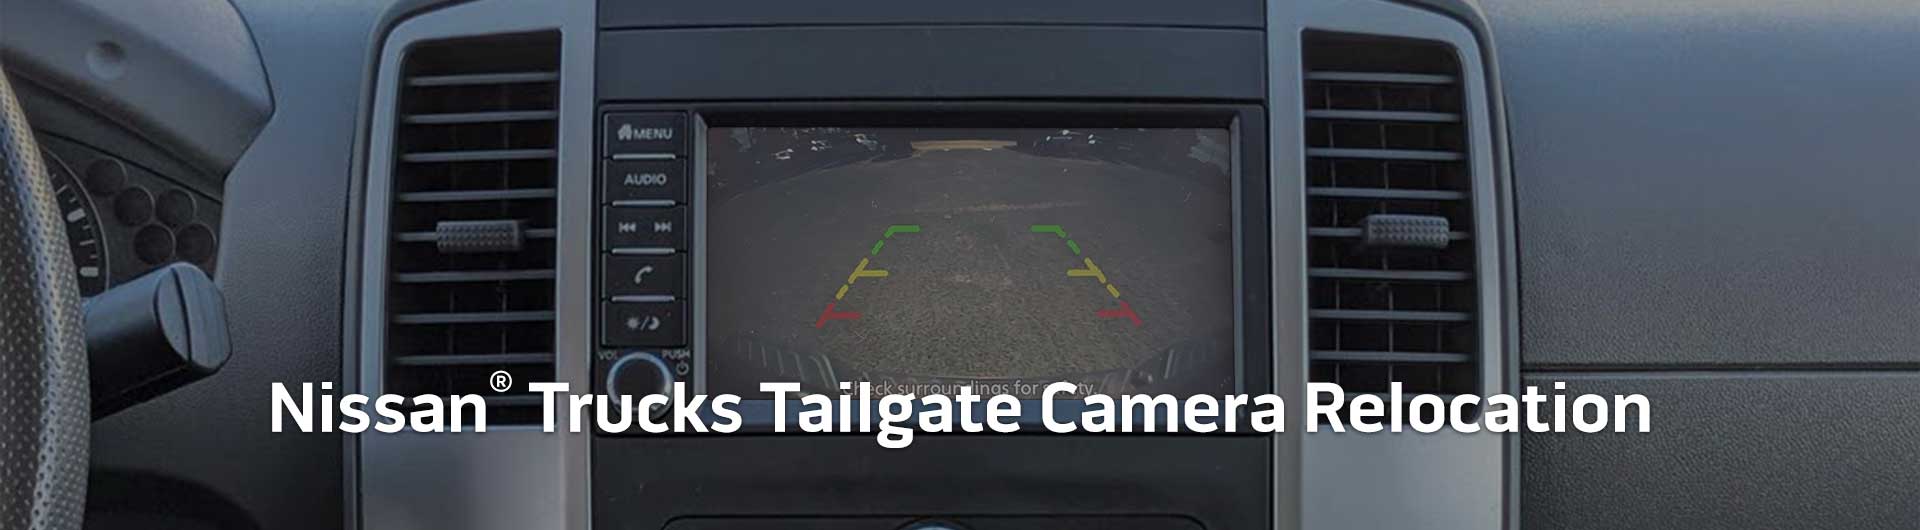 An image showing the in-dash monitor of a Nissan truck. The in-dash monitor shows that the truck is in reverse and is displaying both the backup camera and video from the cameras on the front and side of the truck. The image has text that reads Nissan Trucks Tailgate Camera Relocation.